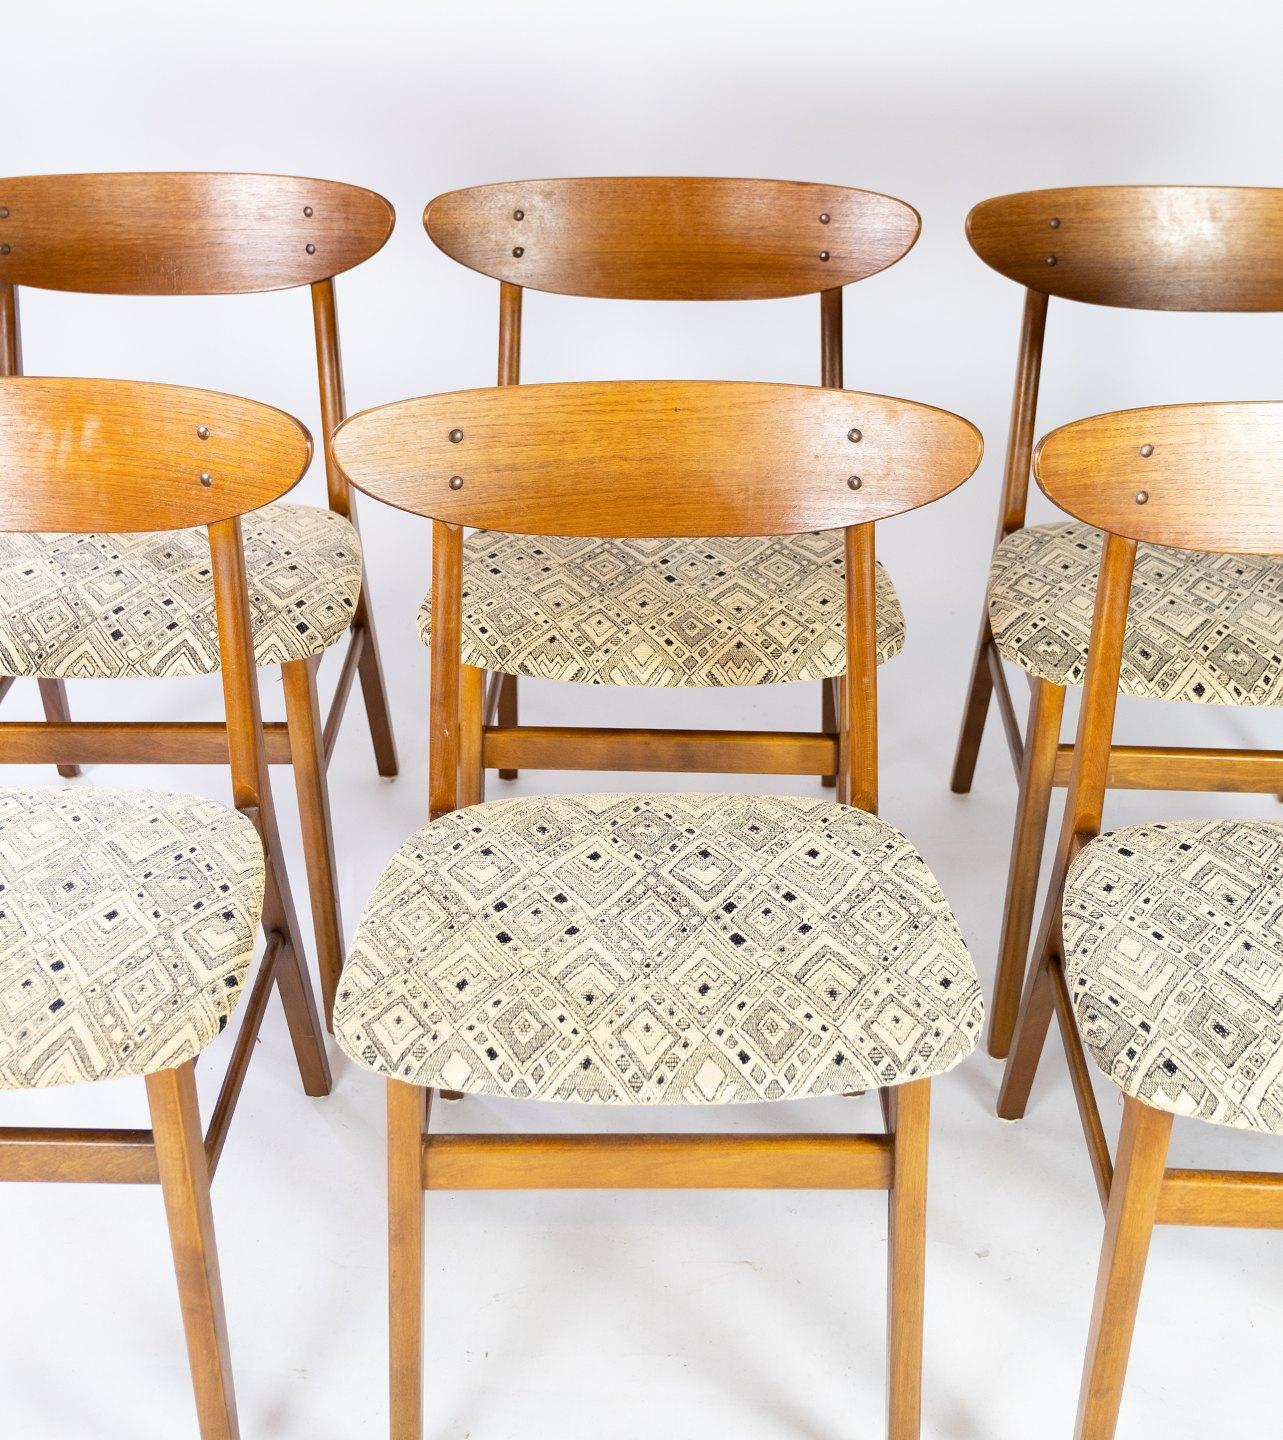 Danish Scandinavian Modern Set of Six Dining Room Chairs in Teak from the 1960s For Sale